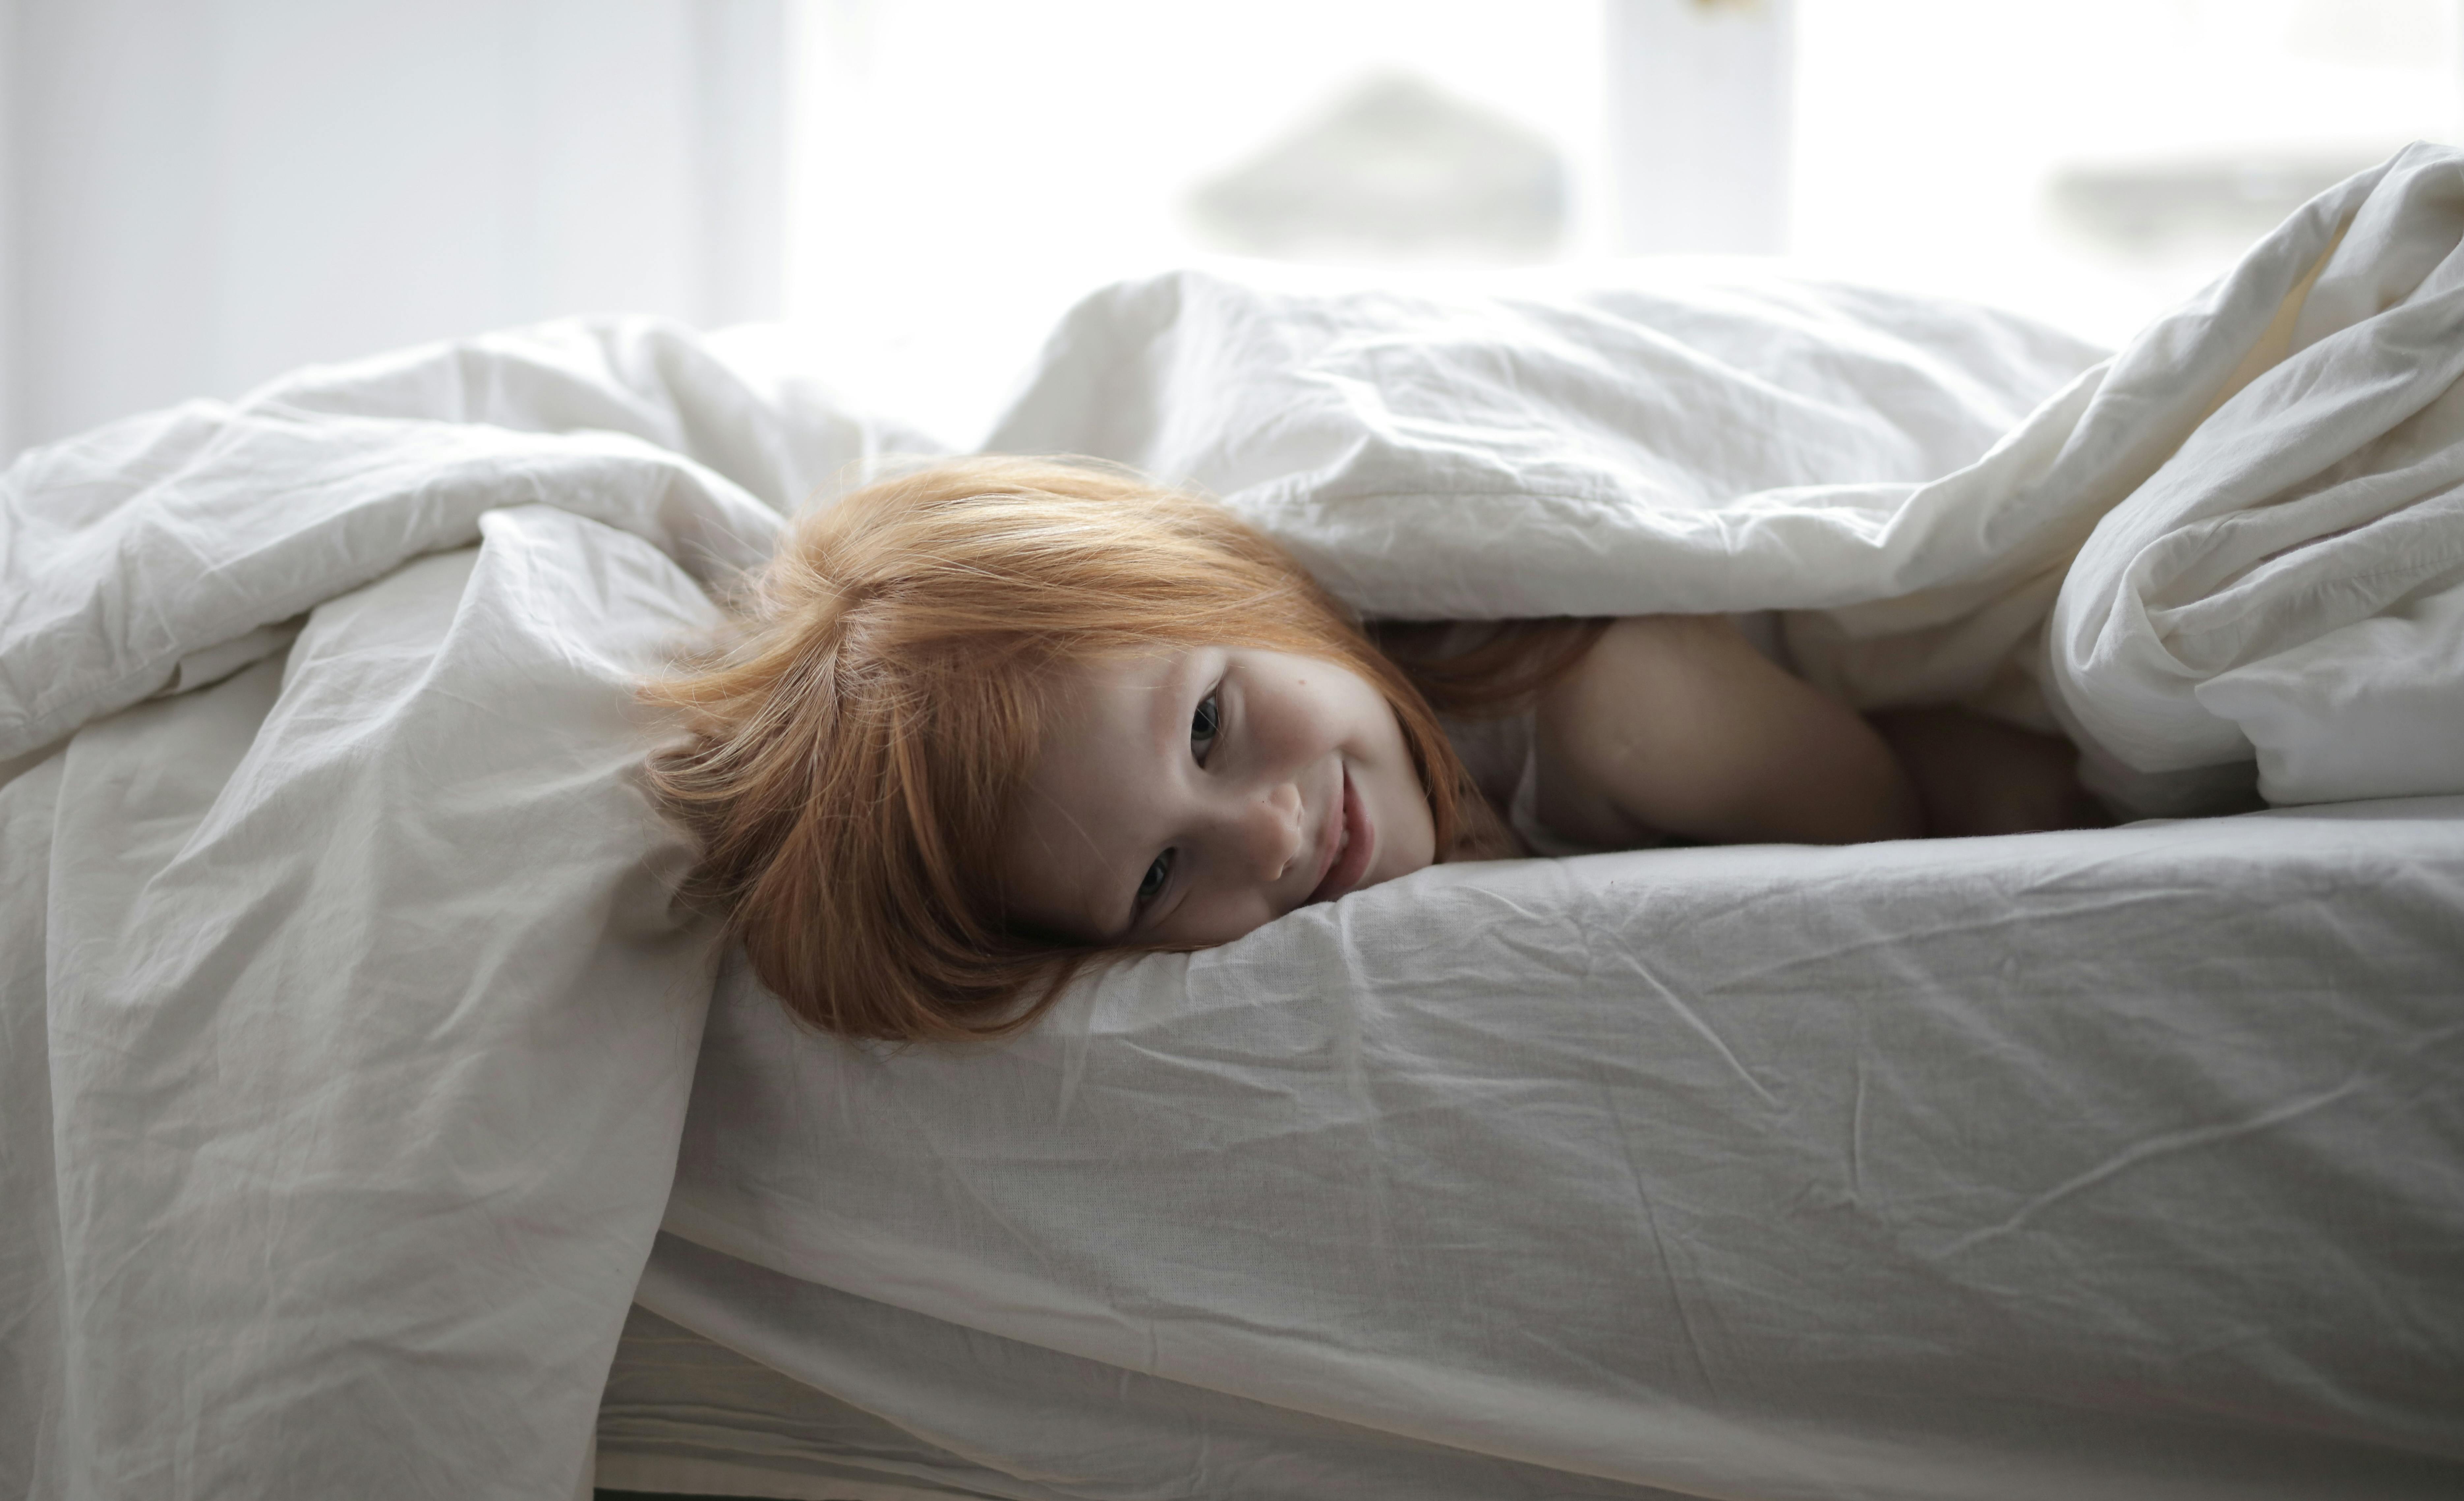 Sleepy woman sleeping in the bed. Stock Photo by ©Voyagerix 112119524